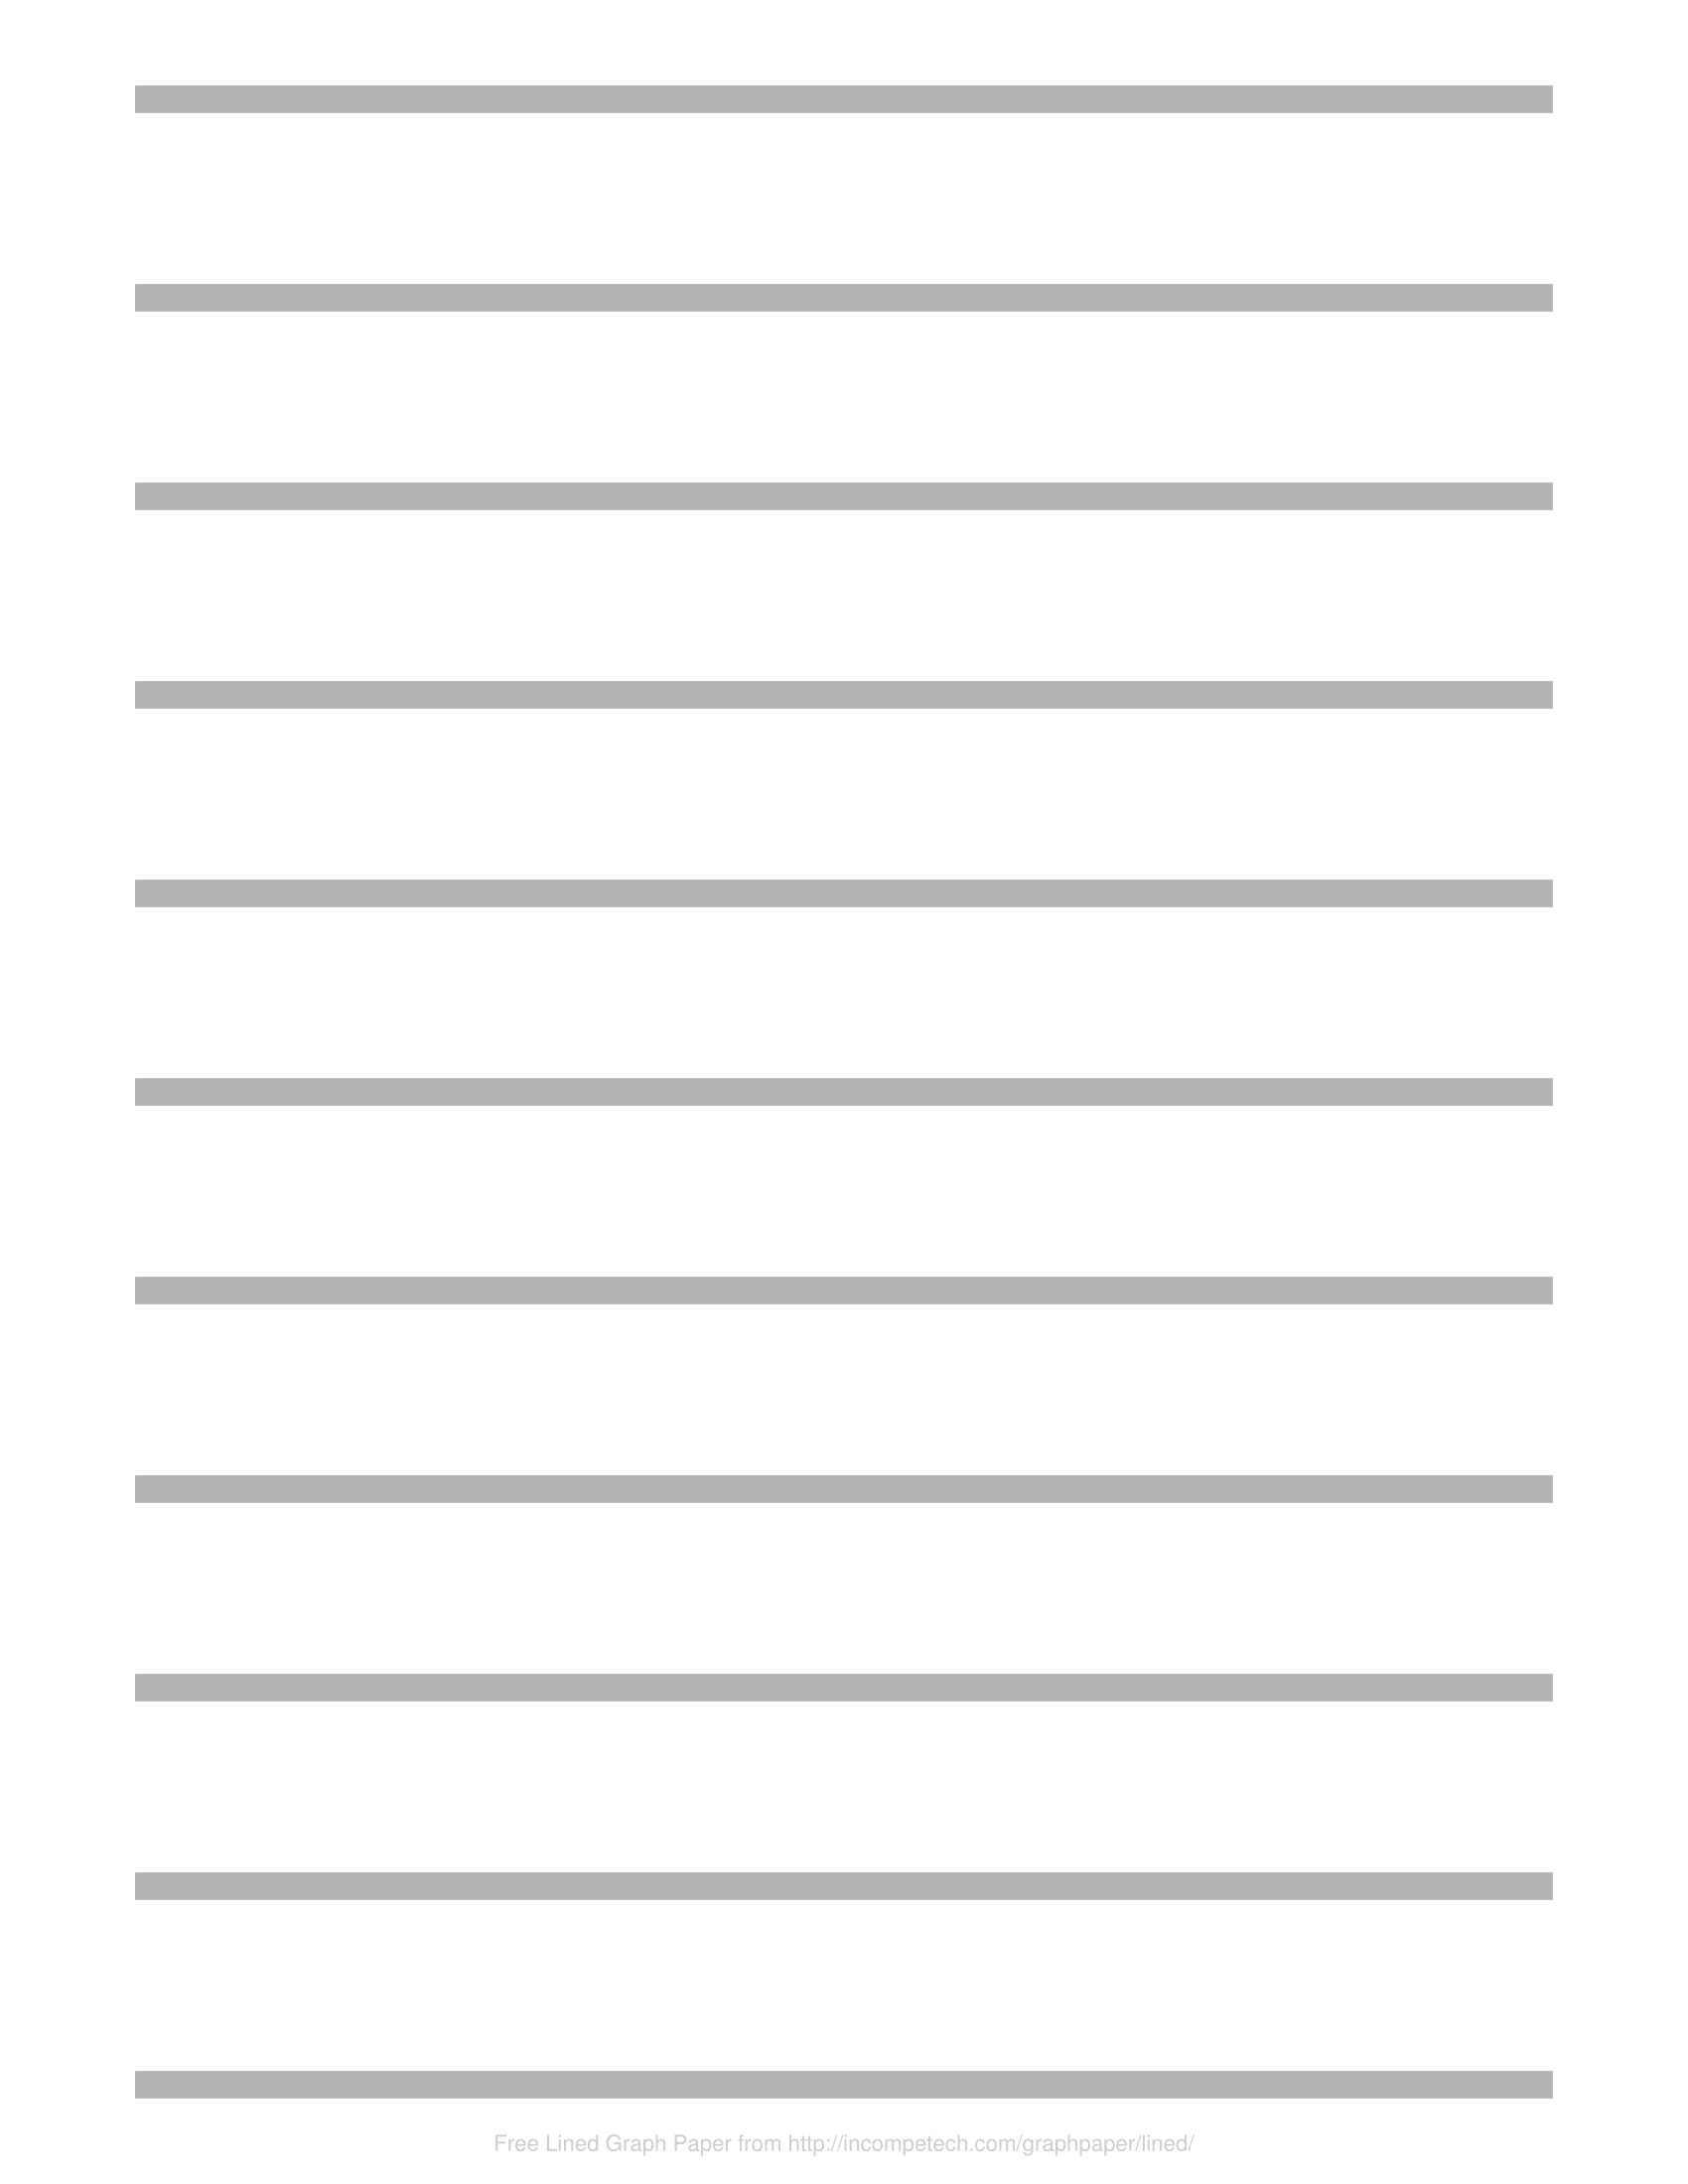 Free Online Graph Paper / Lined - Free Printable Lined Paper